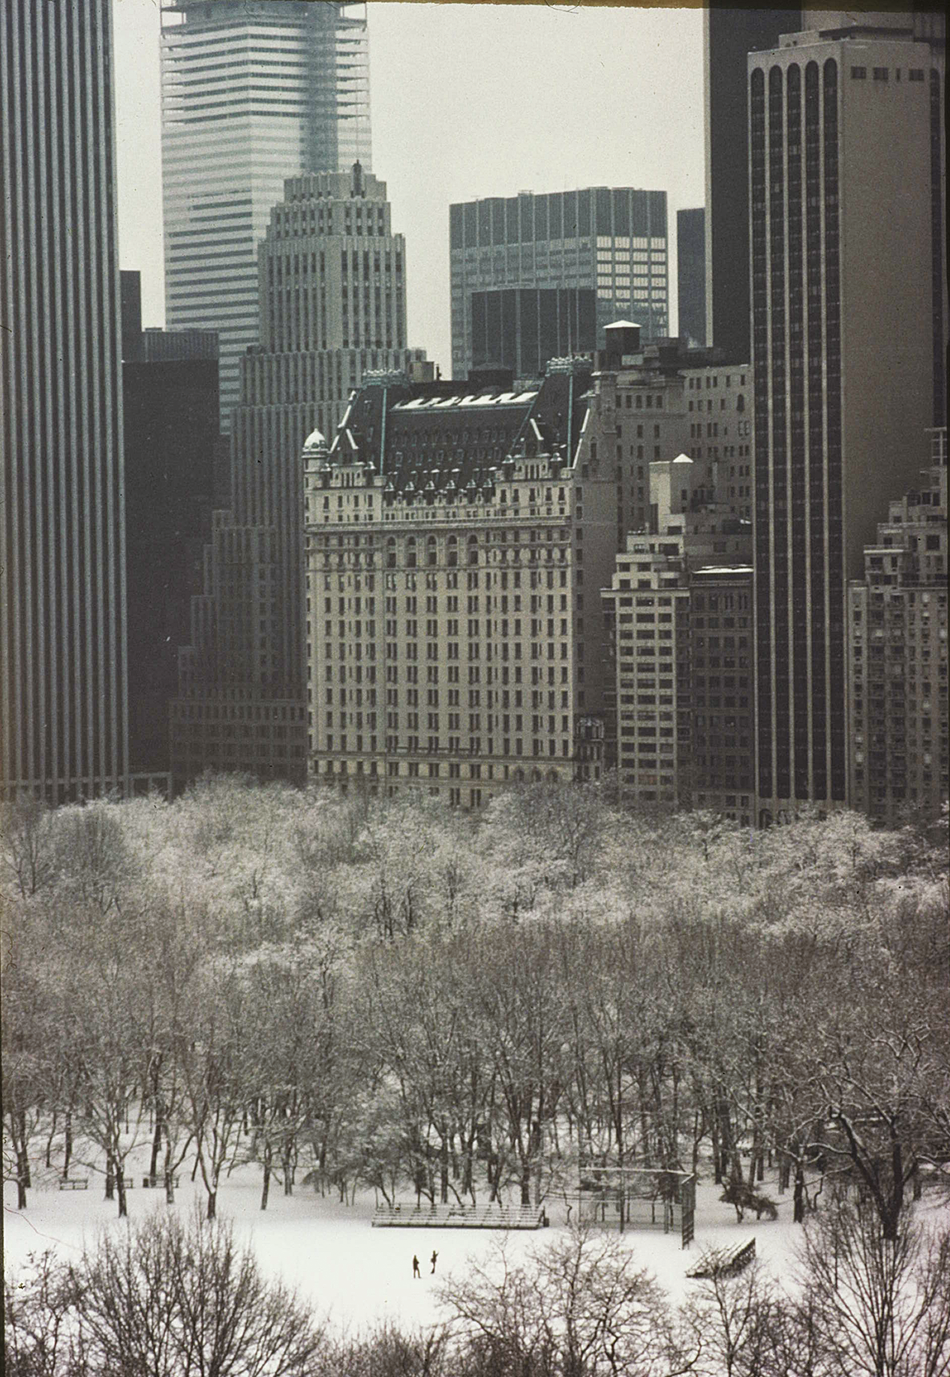 Photograph of snowy plaza surrounded by trees with skyscrapers in the background. 